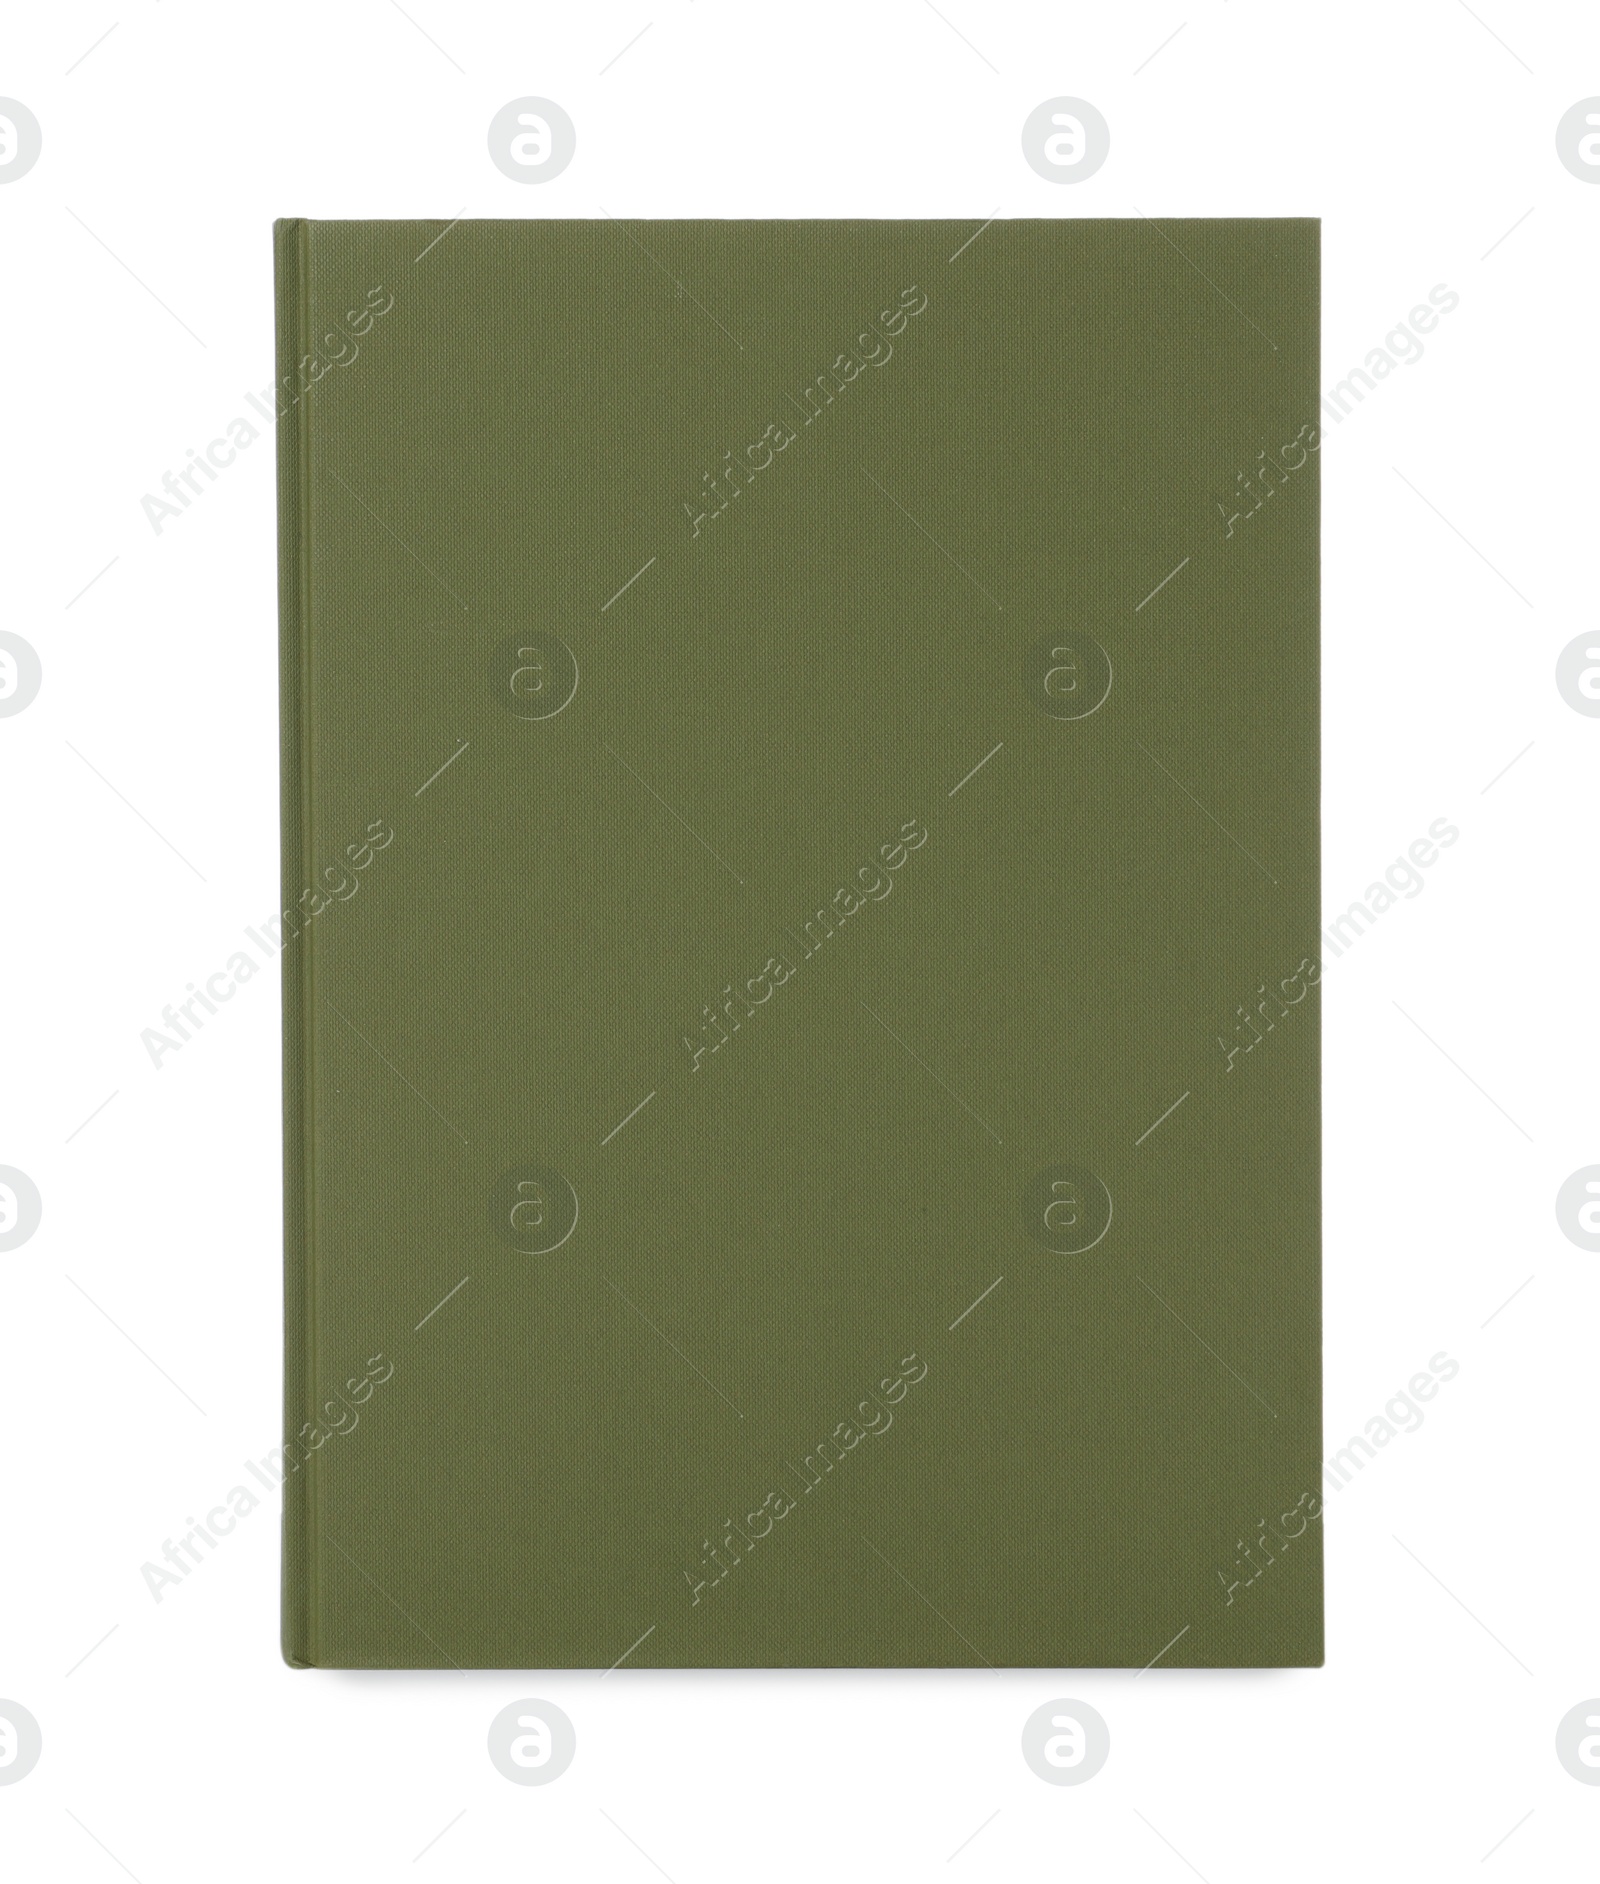 Photo of Closed book with olive hard cover isolated on white